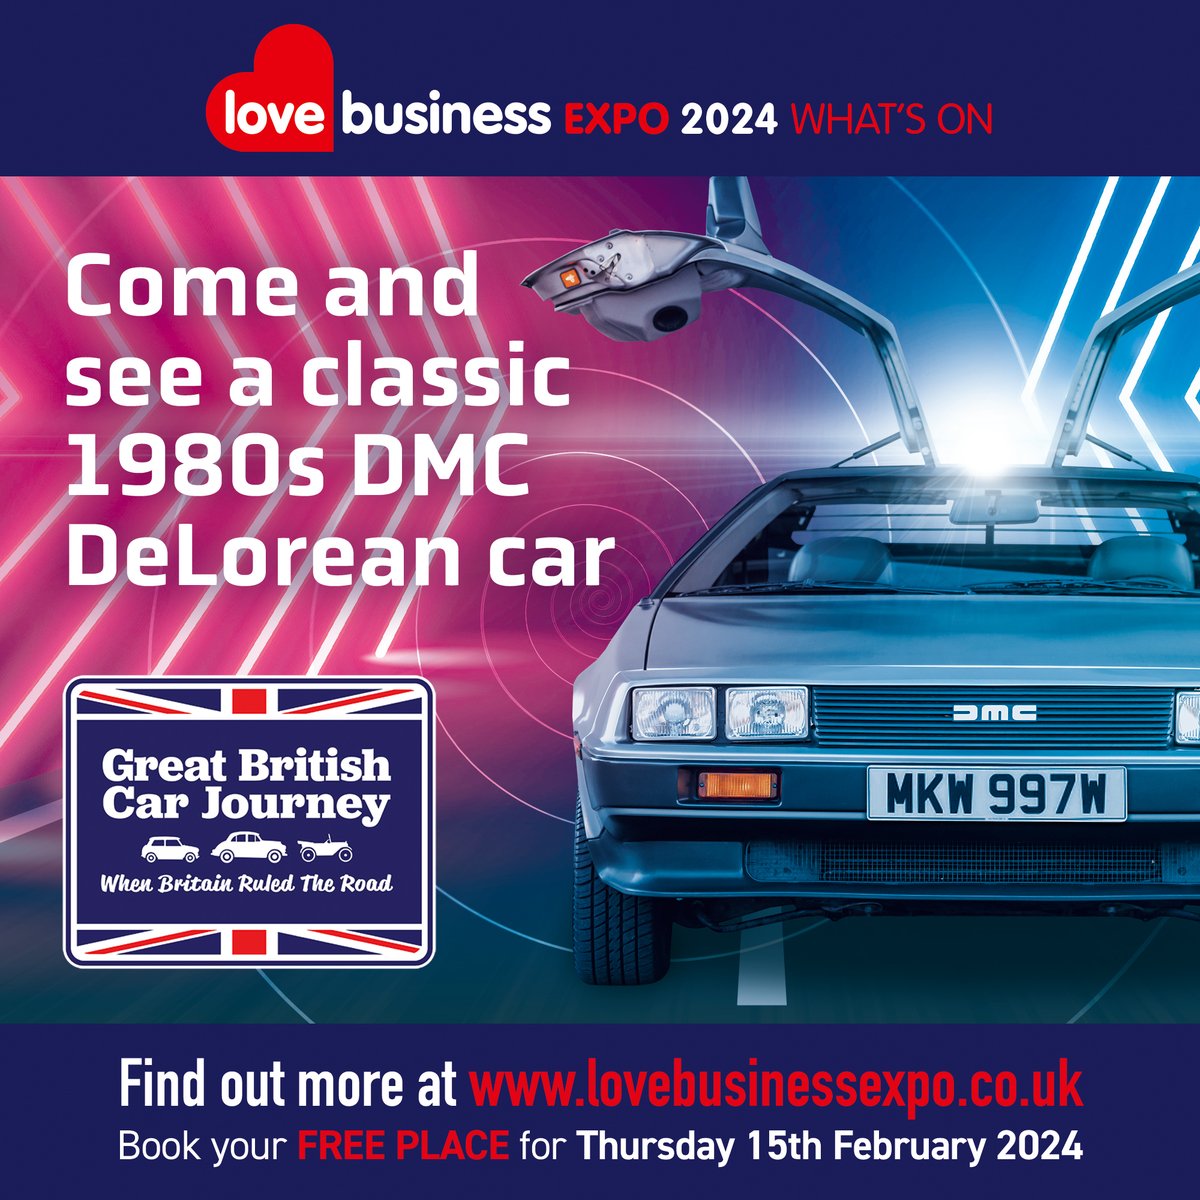 Calling all Back to the Future fans! The iconic DeLorean DMC-12 car from the Back to the Future trilogy will be making a special appearance at Love Business EXPO 2024 Book your FREE delegate ticket for Love Business EXPO 2024. lovebusinessexpo.co.uk